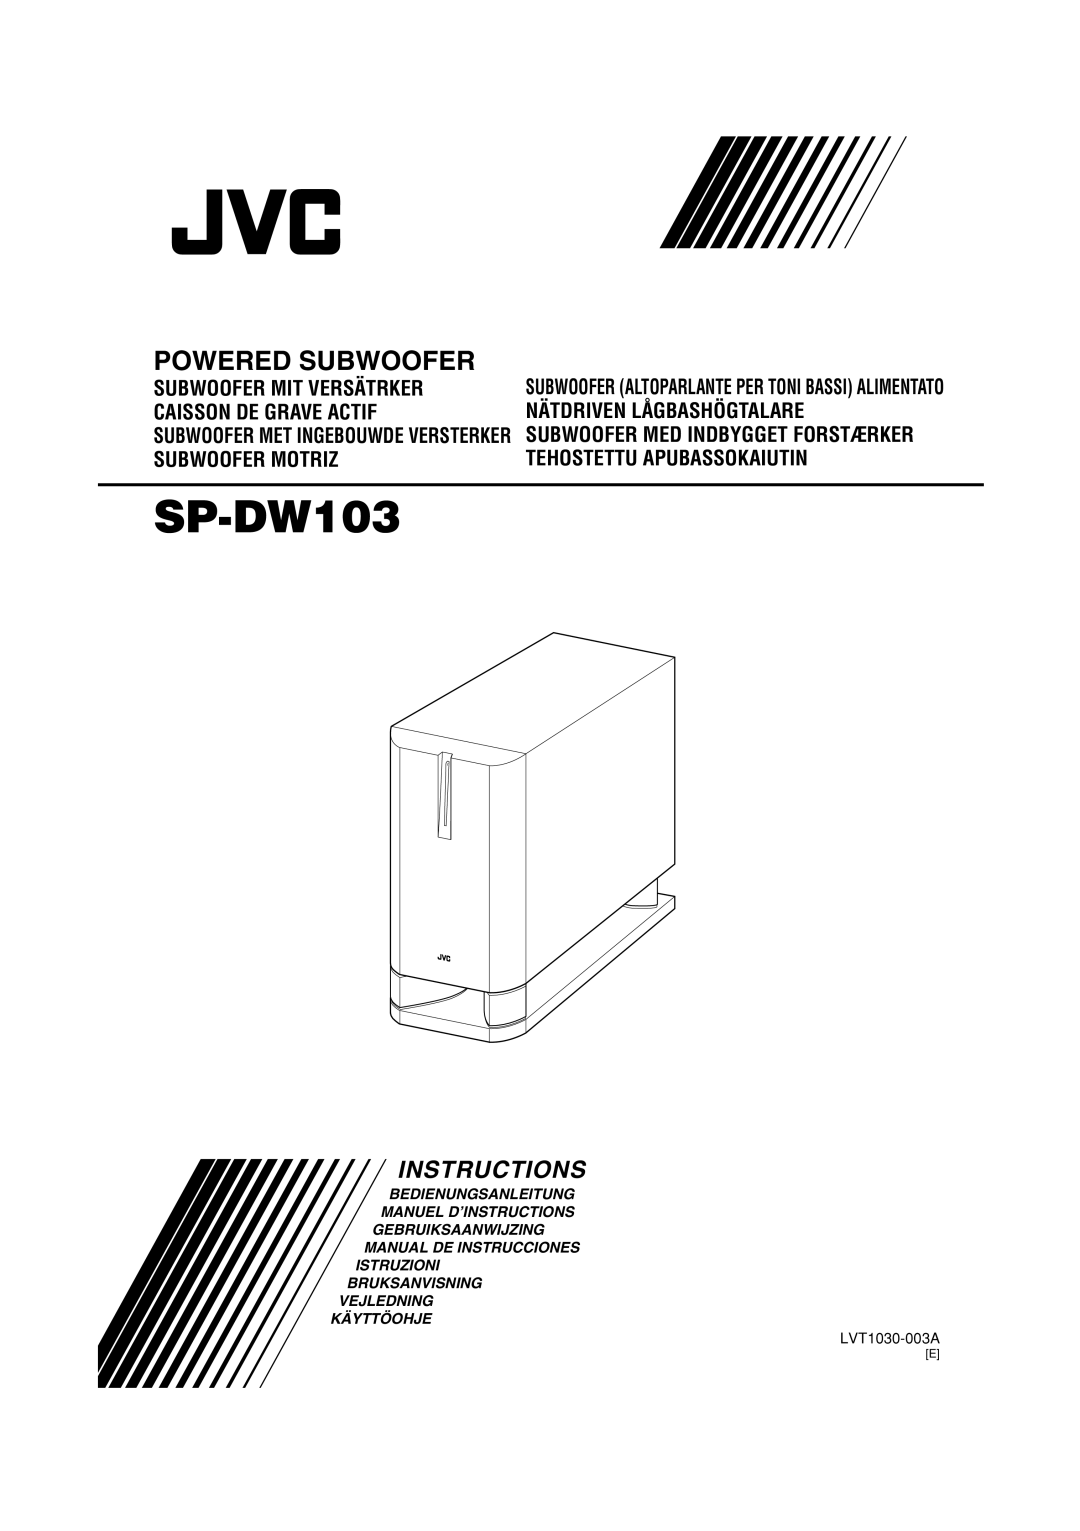 JVC SP-DW103 manual LVT1030-003A, Compact Component System, Powered Subwoofer, Instructions 